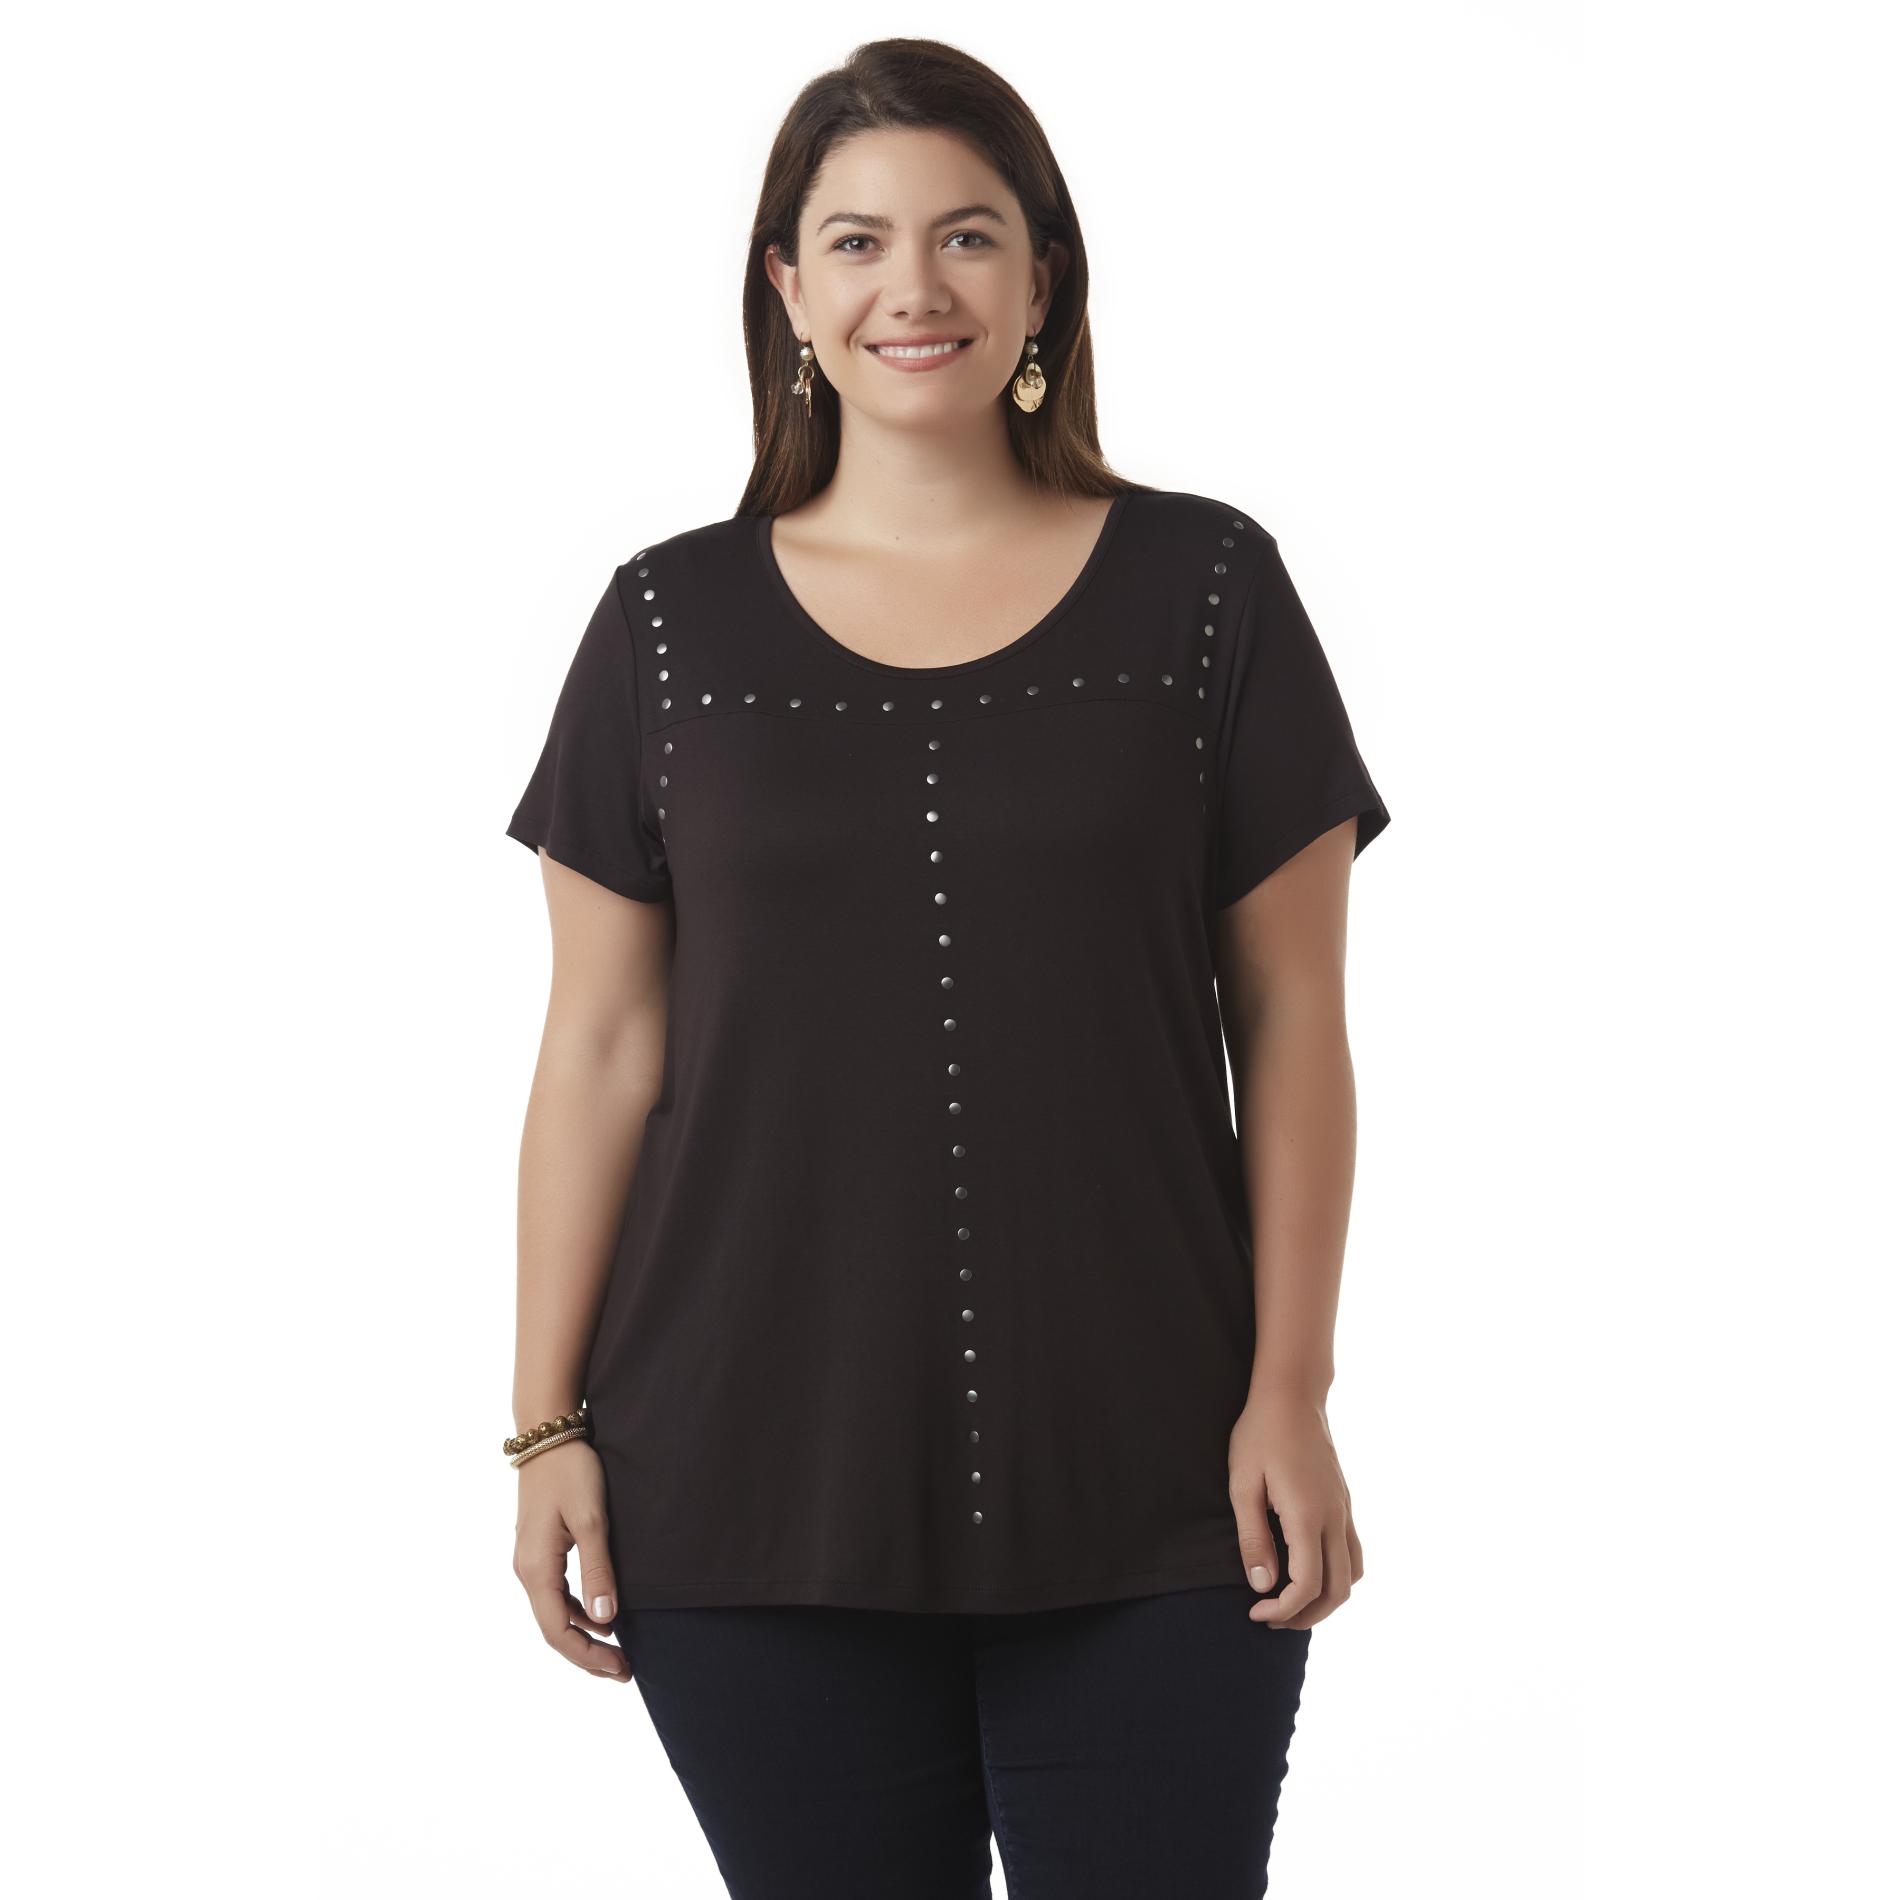 Simply Emma Women's Plus Embellished Top